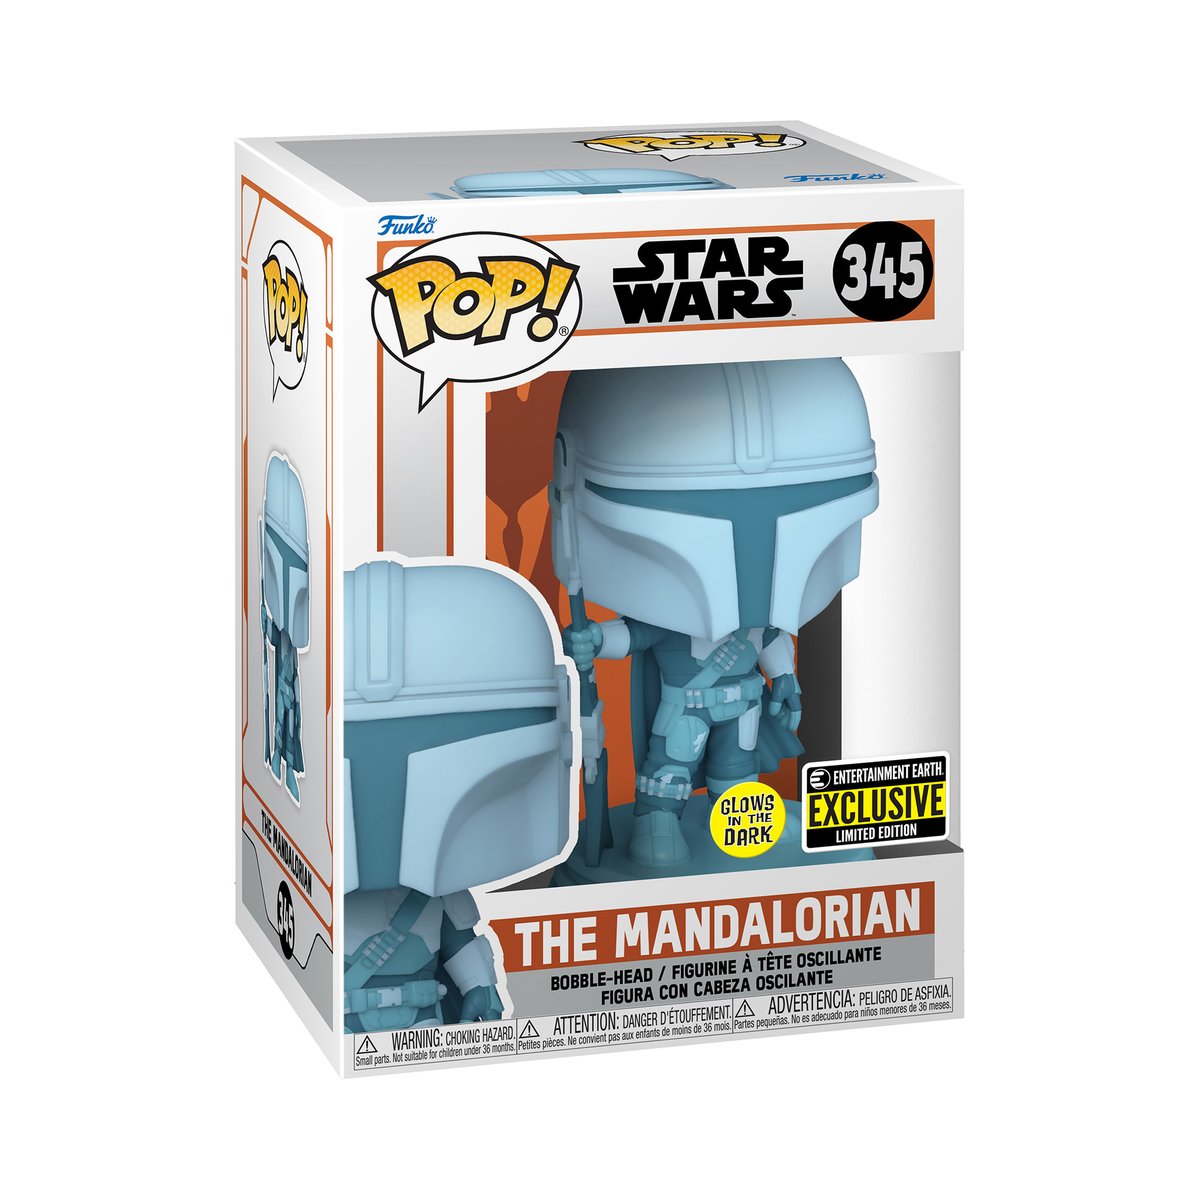 RT and follow @OriginalFunko for the chance to WIN the @EntEarth exclusive The Mandalorian Hologram Glow-in-the-Dark Pop! Not feeling lucky? Pre-Order now: bit.ly/3Hzkk4k #Funko #FunkoPop #Giveaway #TheMandalorian #StarWars @themandalorian